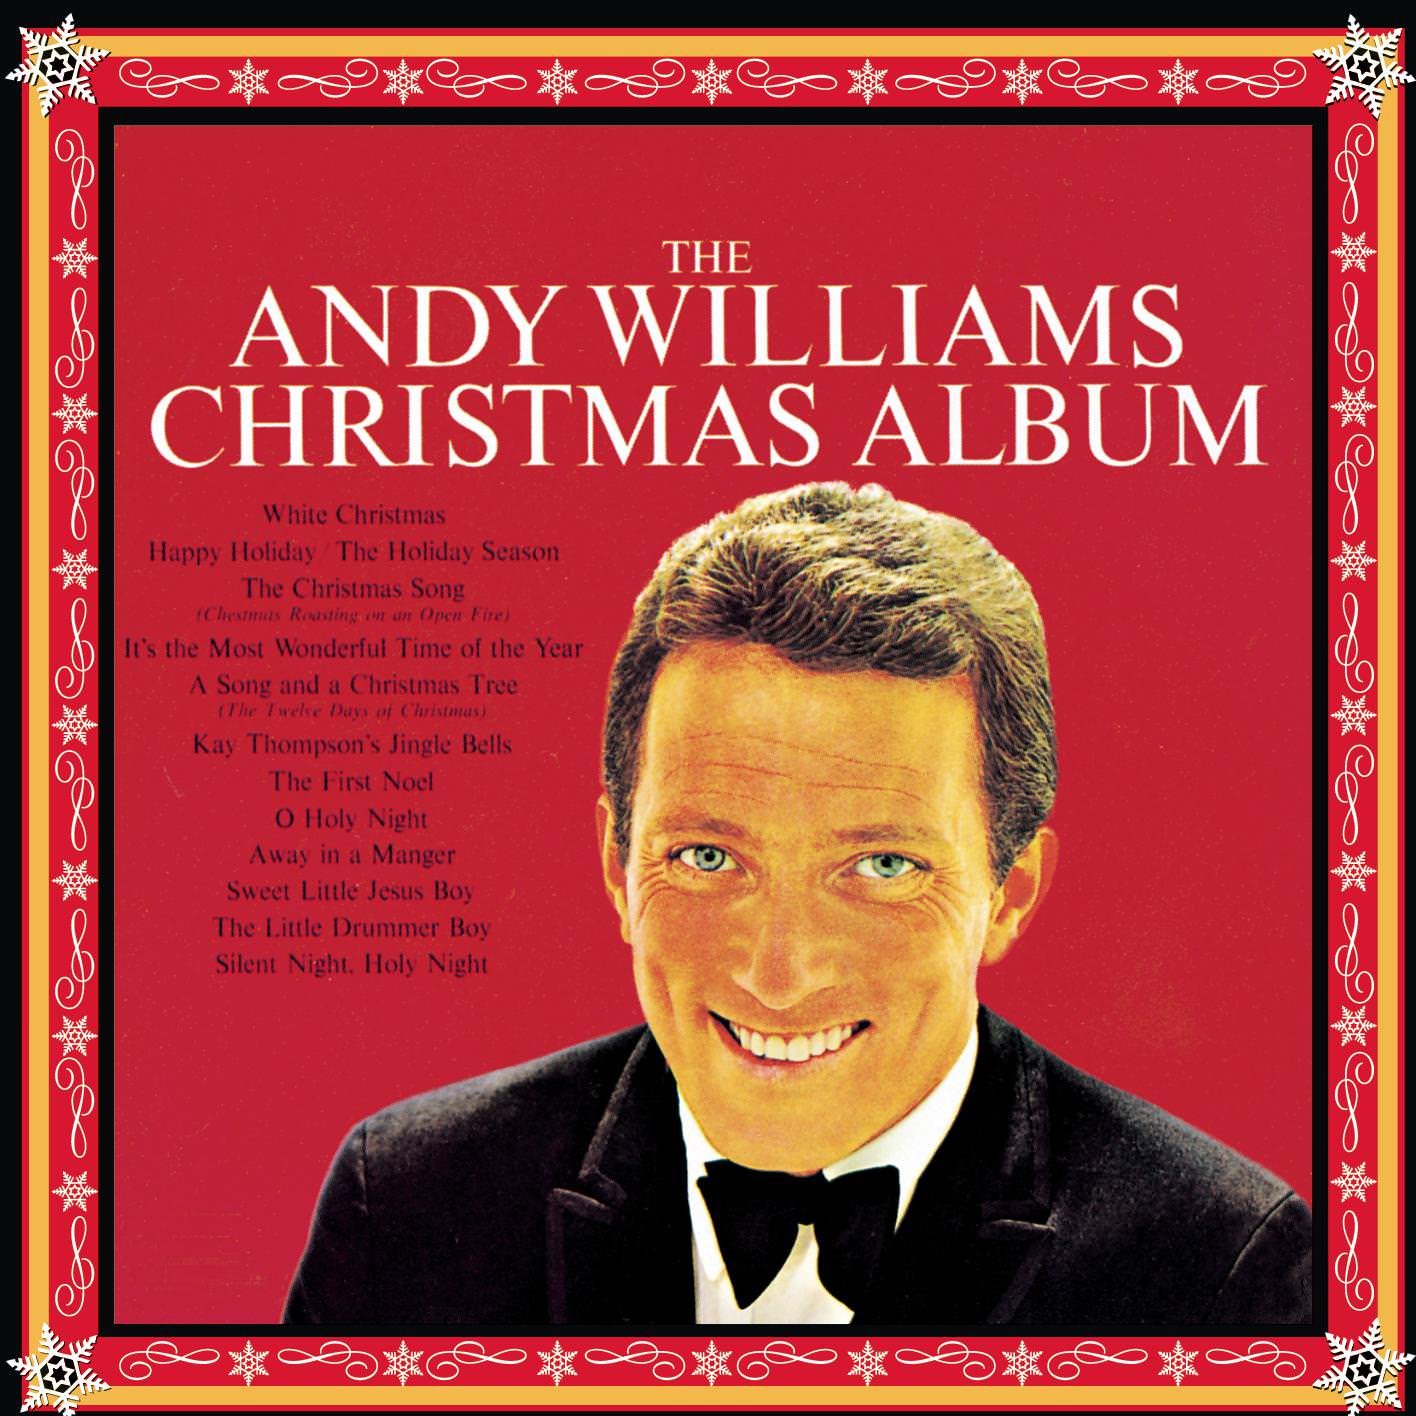 Andy Williams - The Andy Williams Christmas Album (1963/2013) [HDTracks FLAC 24bit/192kHz]